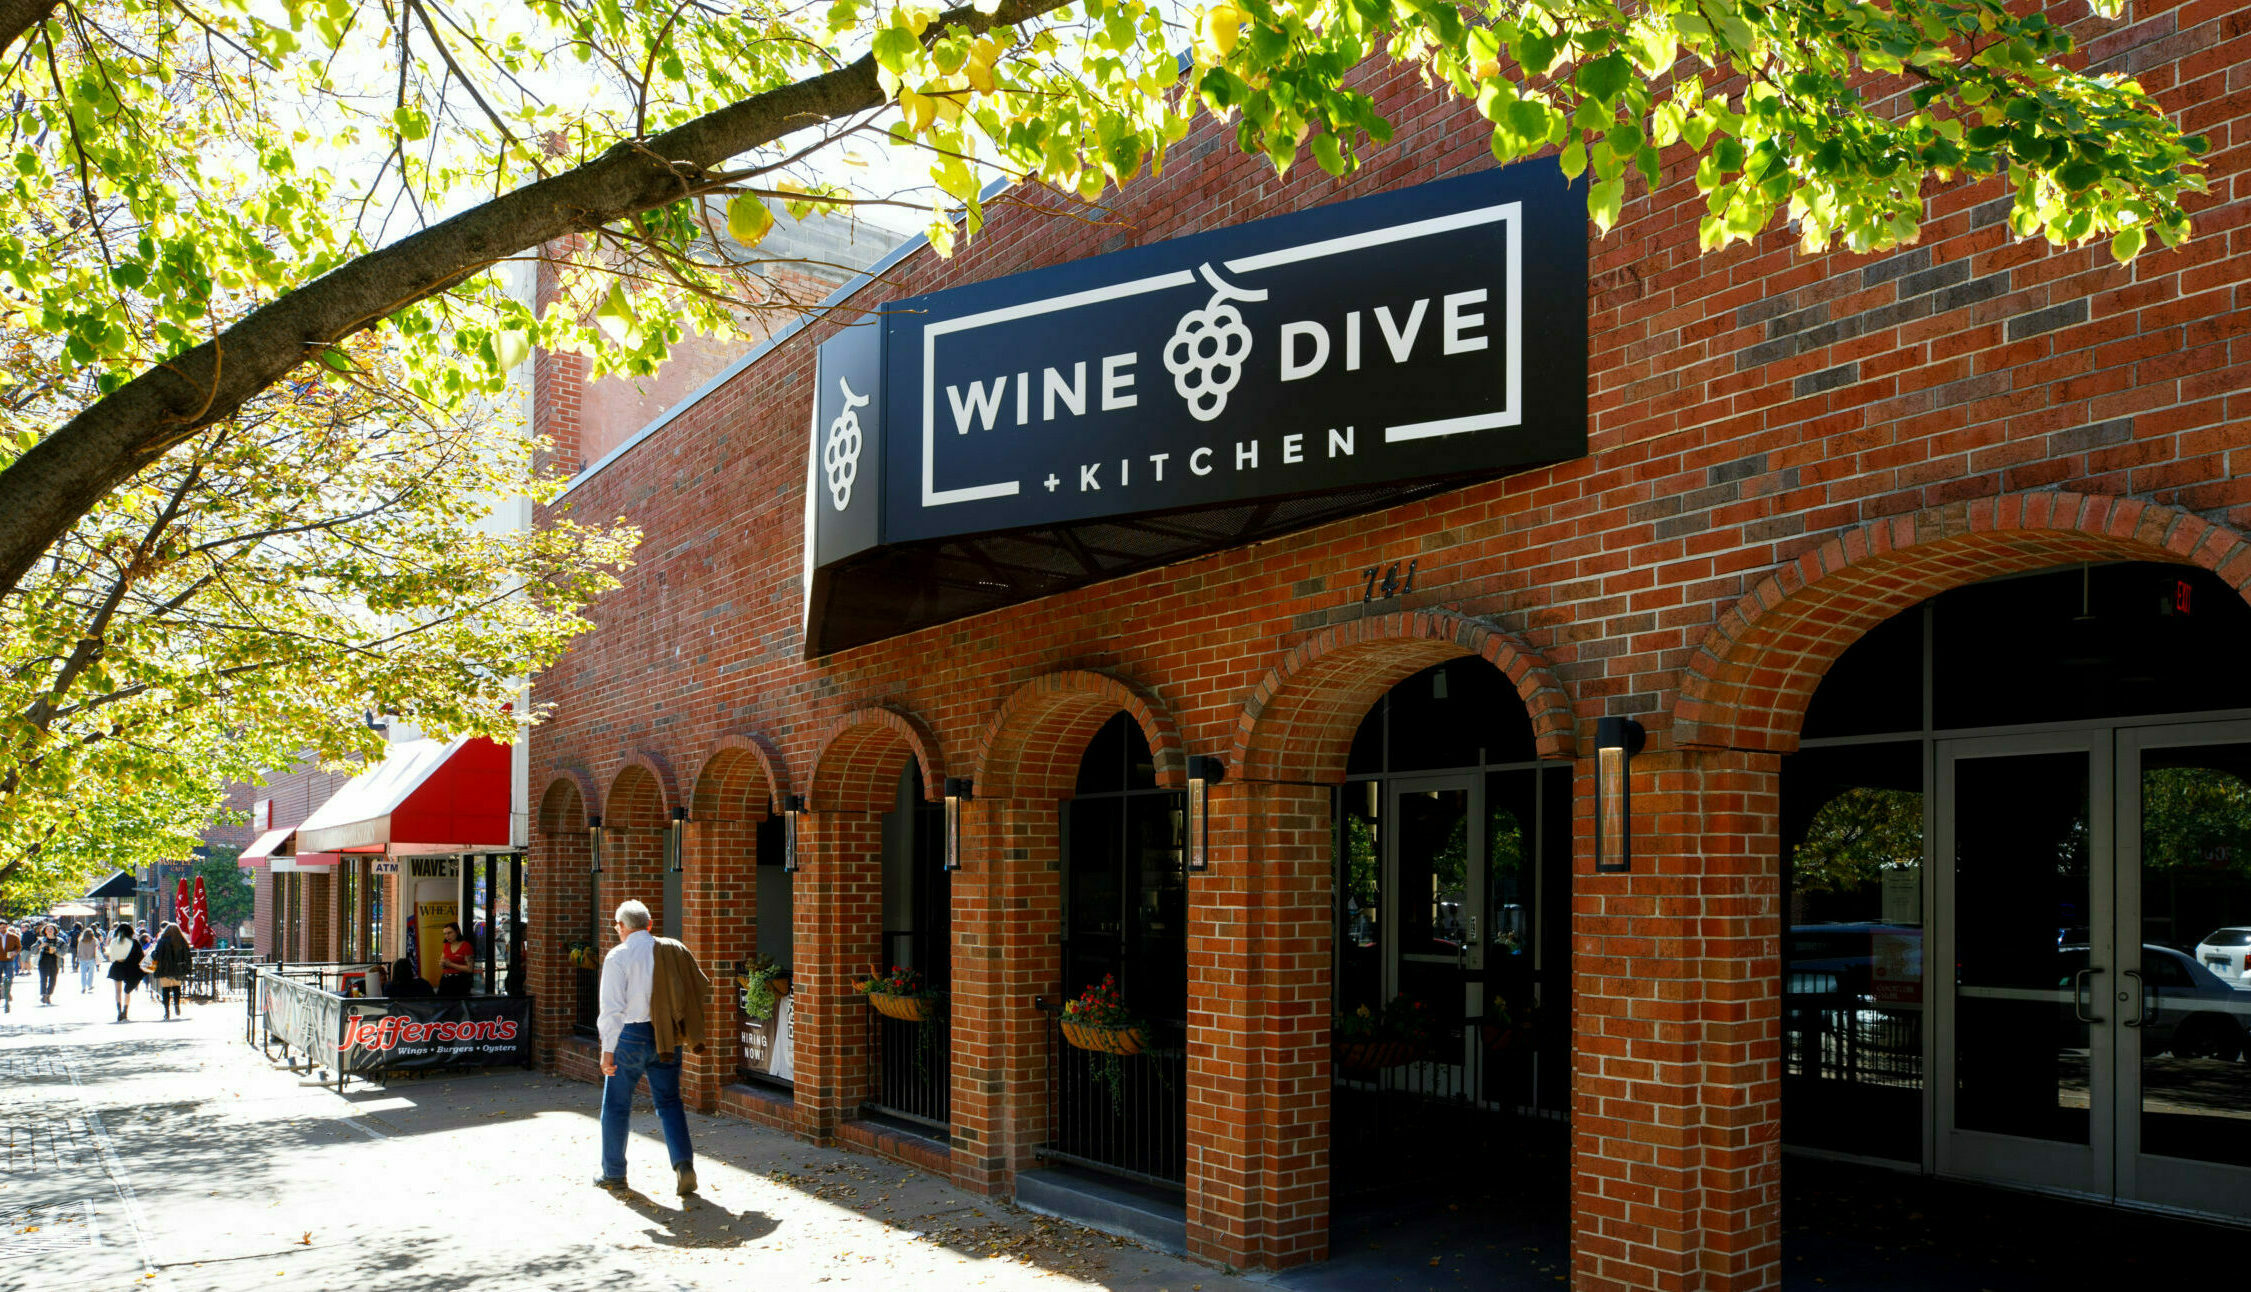 Partners in Wine! Check out Wine Dive in Lawrence, KS!